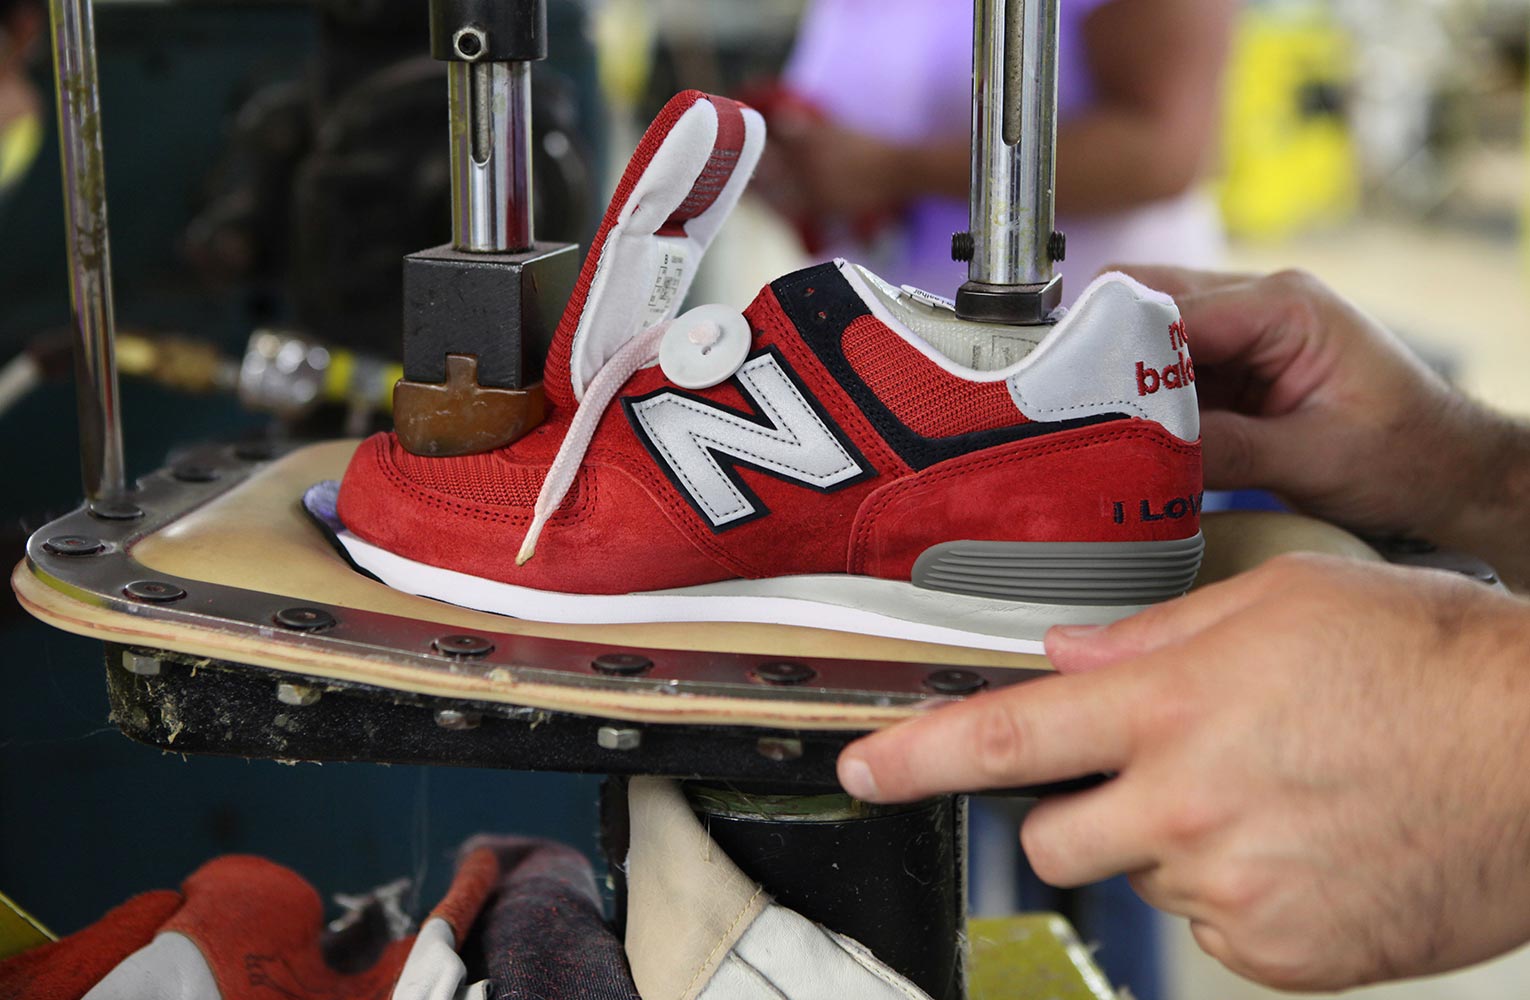 new balance manufactures its shoes in